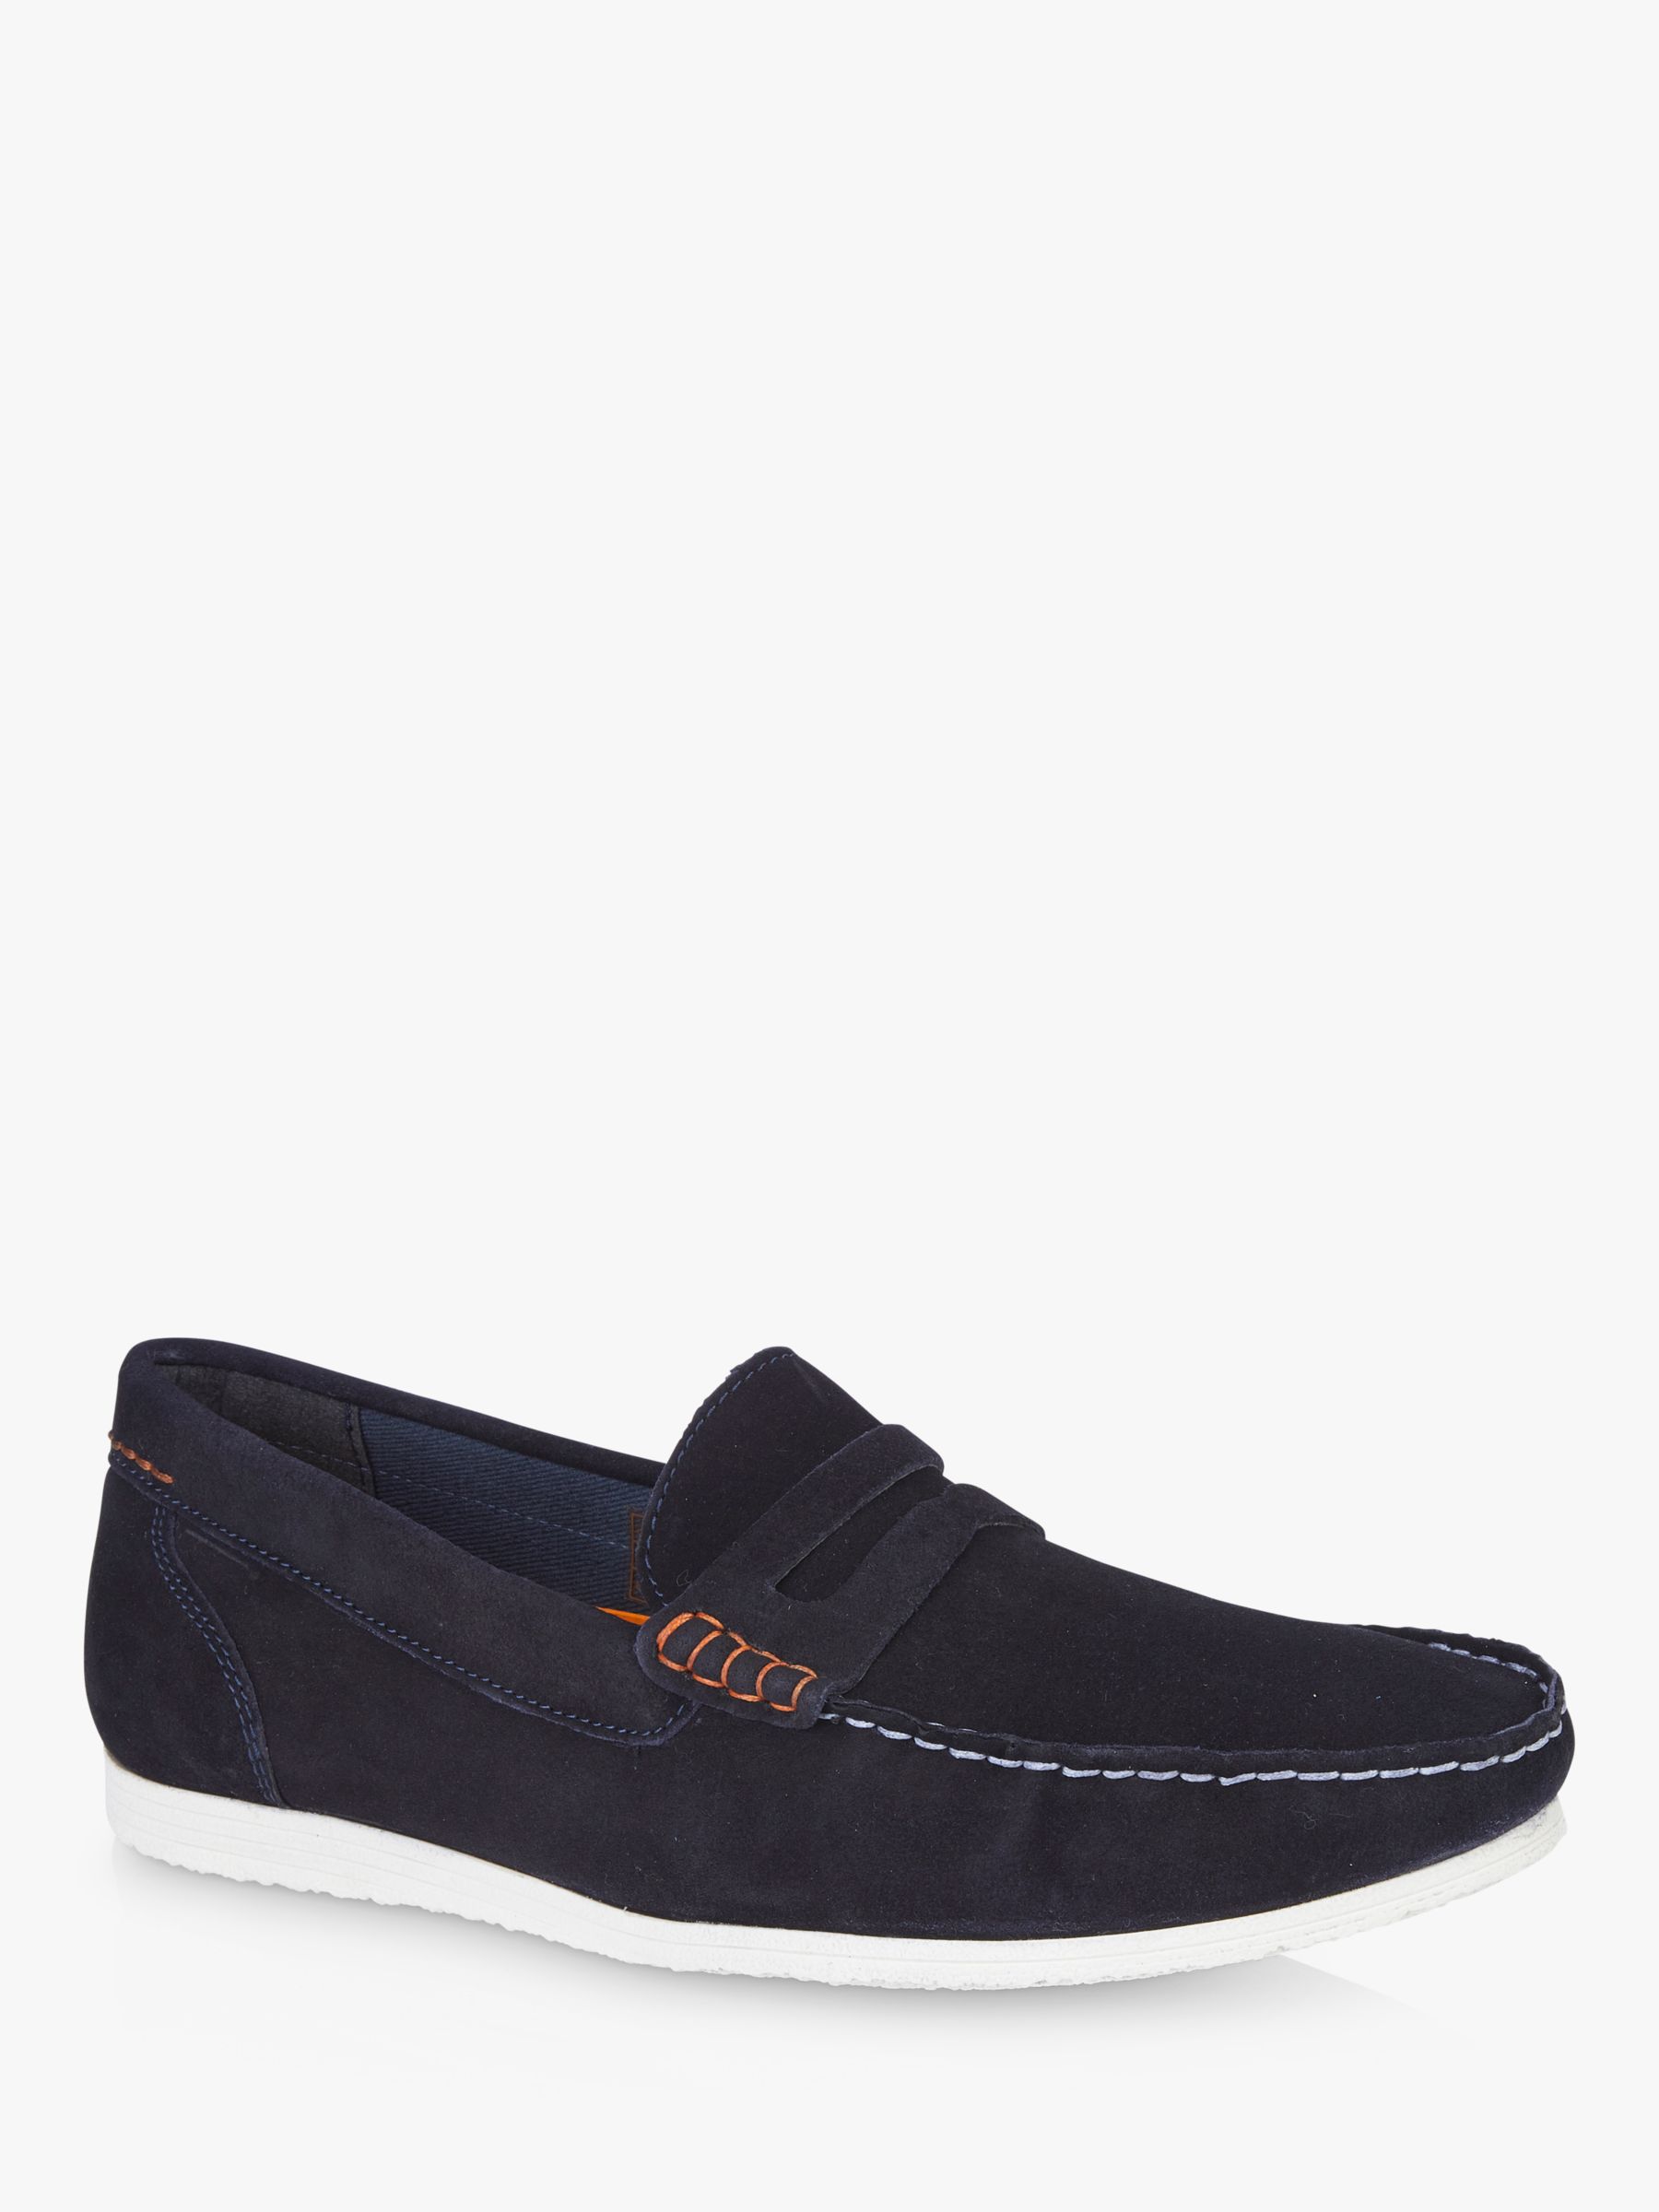 Silver Street London Stanhope Suede Loafers, Navy, 12